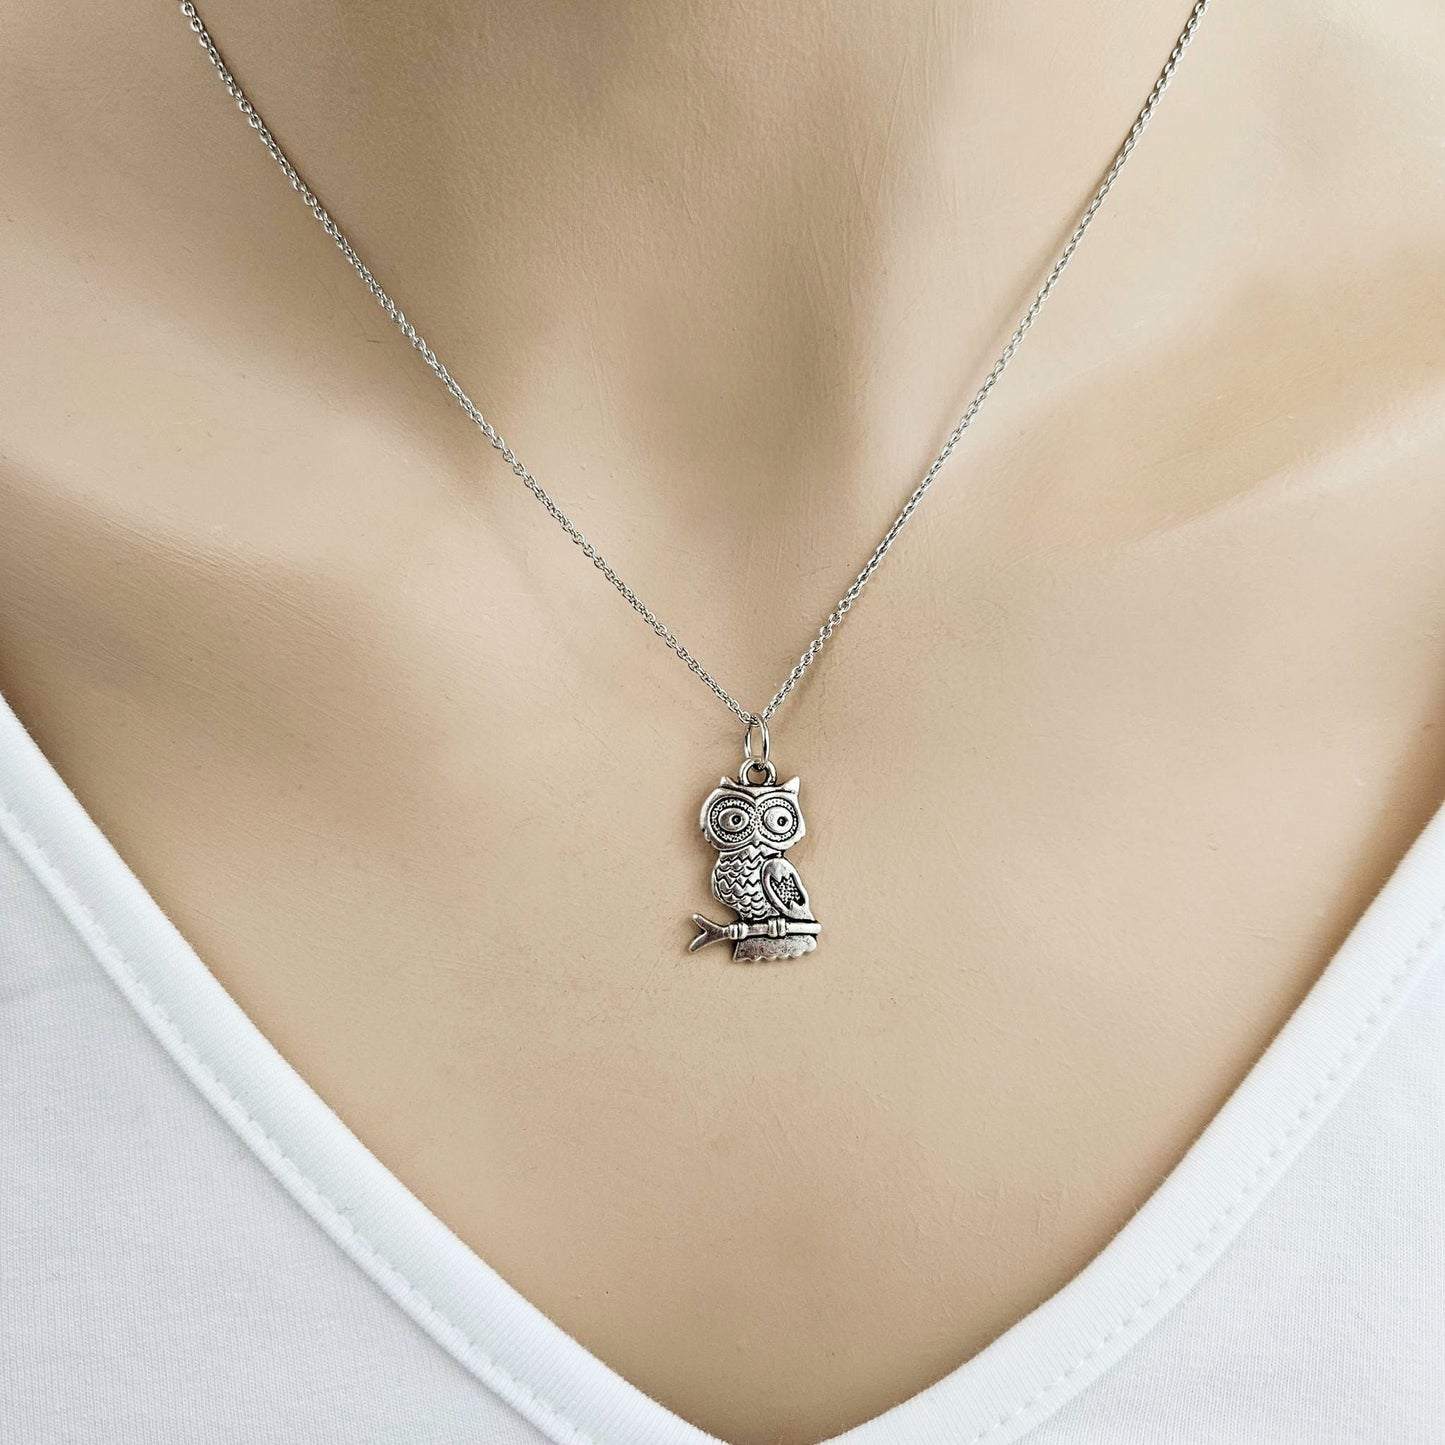 Silver Owl Charm Necklace, Everyday Minimalist Jewelry for Women, Tween Teen Girl Gift